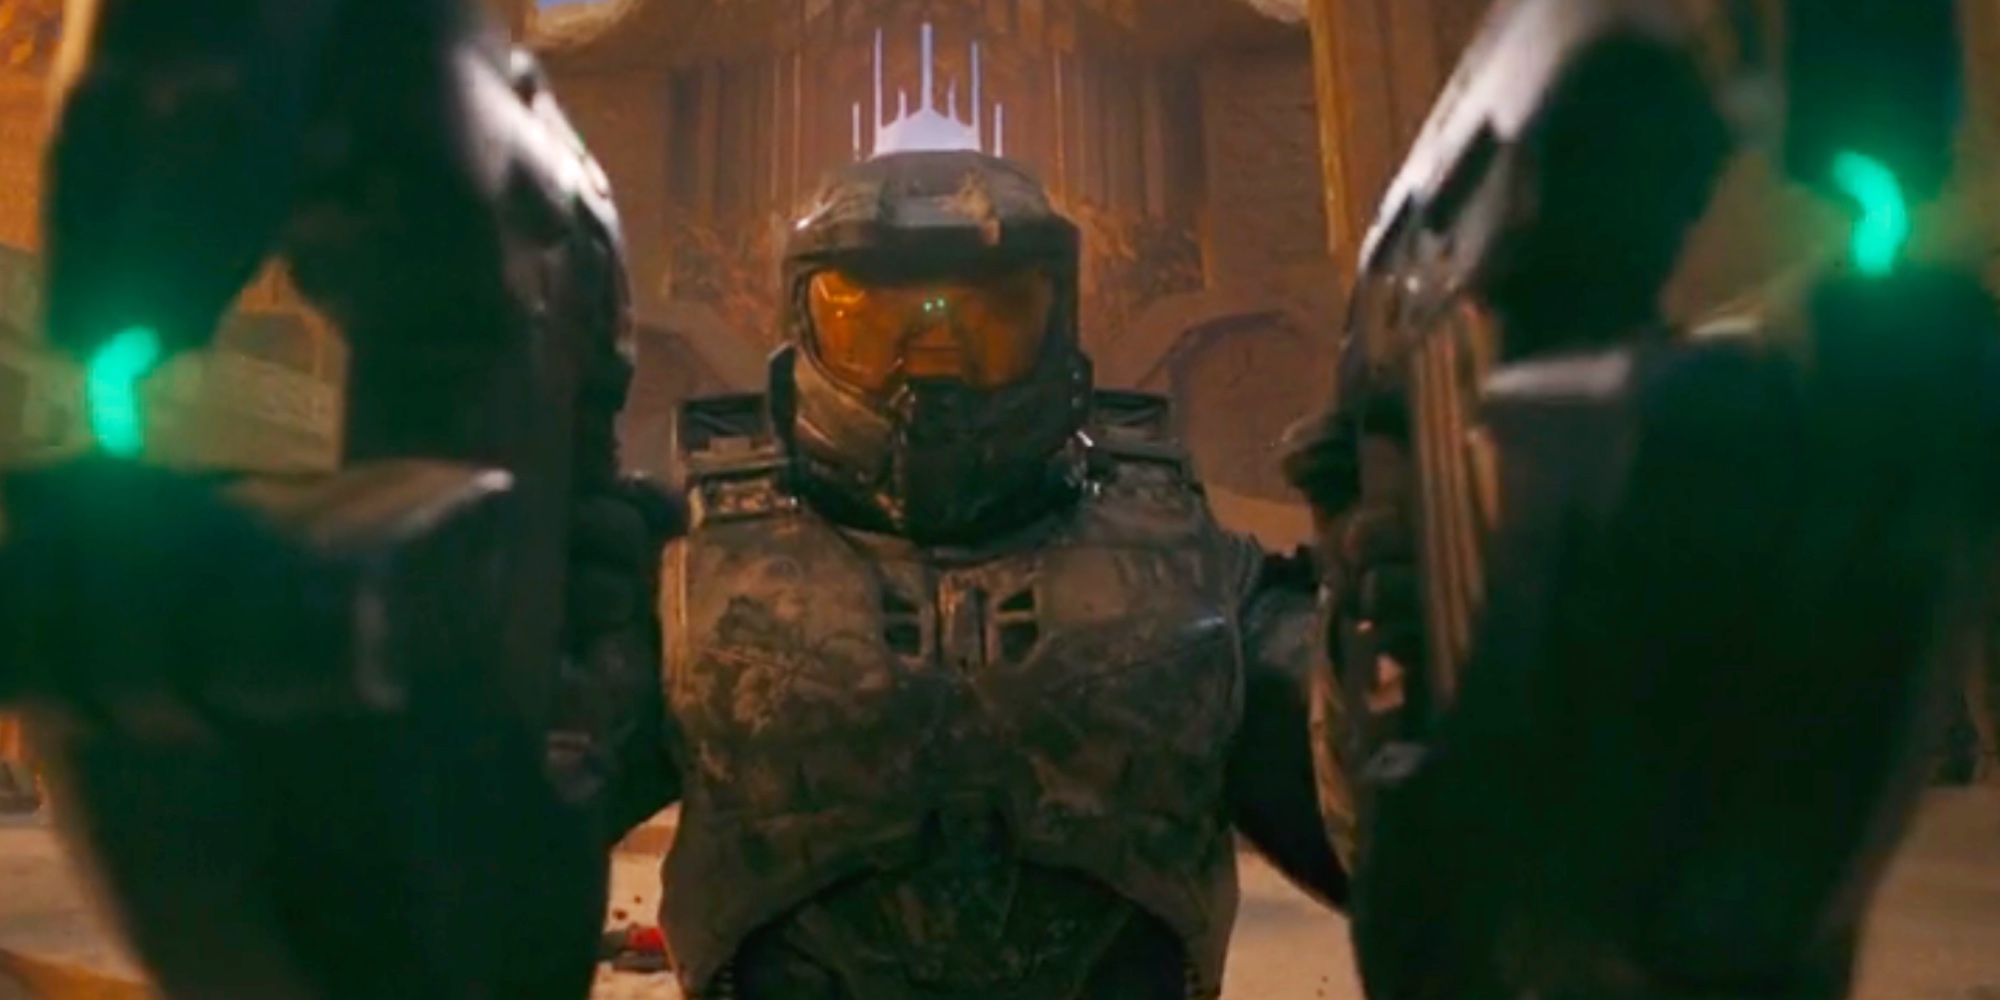 Halo Finally Delivers The Games' Master Chief – But It's Too Late